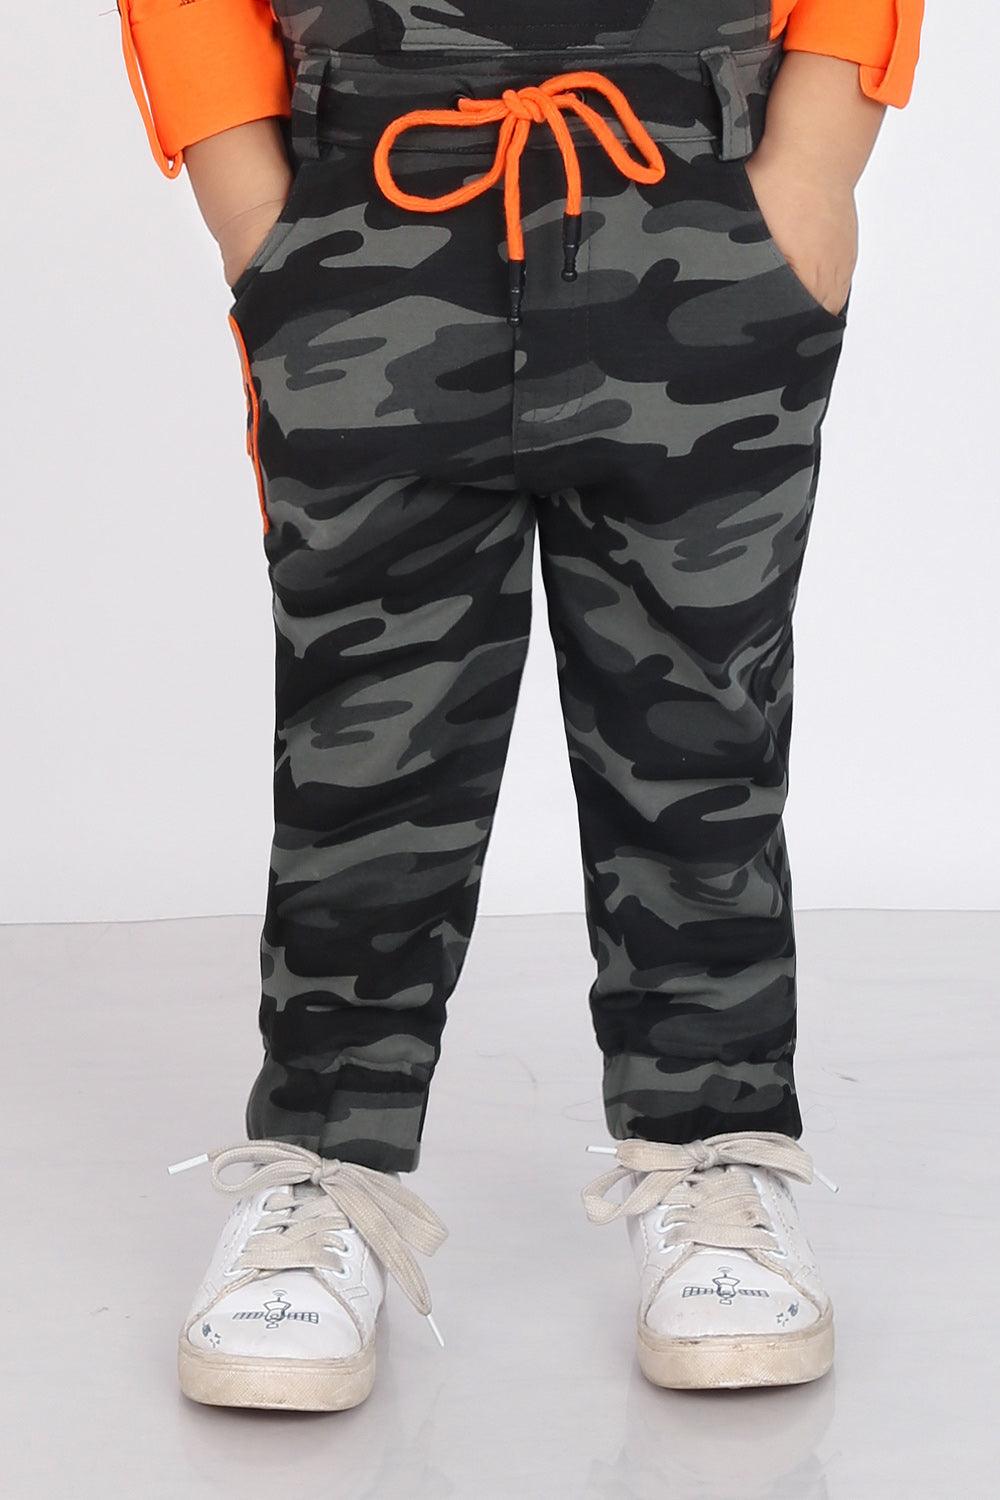 Camouflage dungaree with an inner T-shirt set - Lagorii Kids